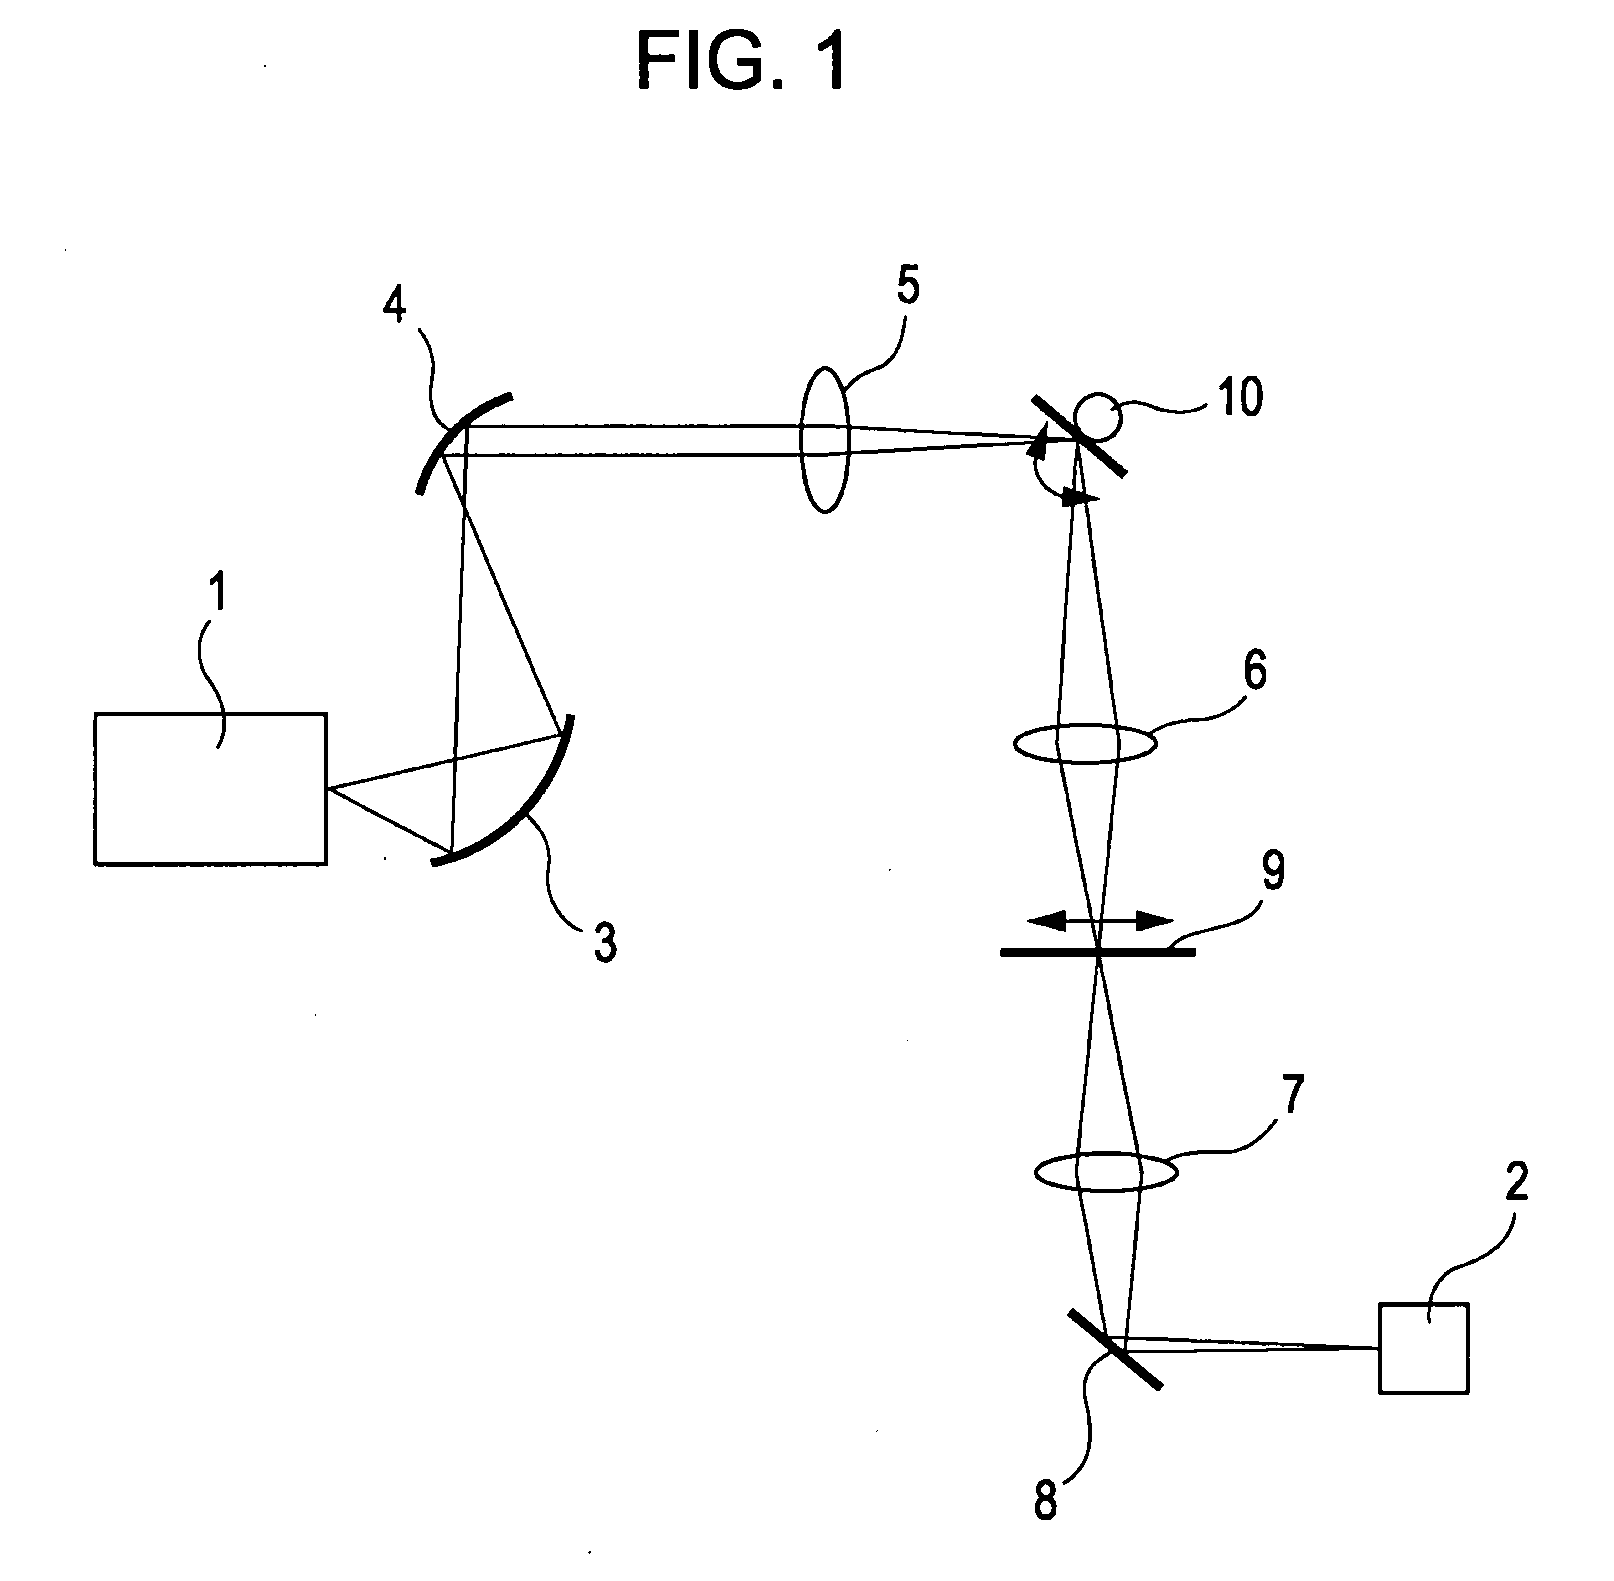 Apparatus for detecting information on object